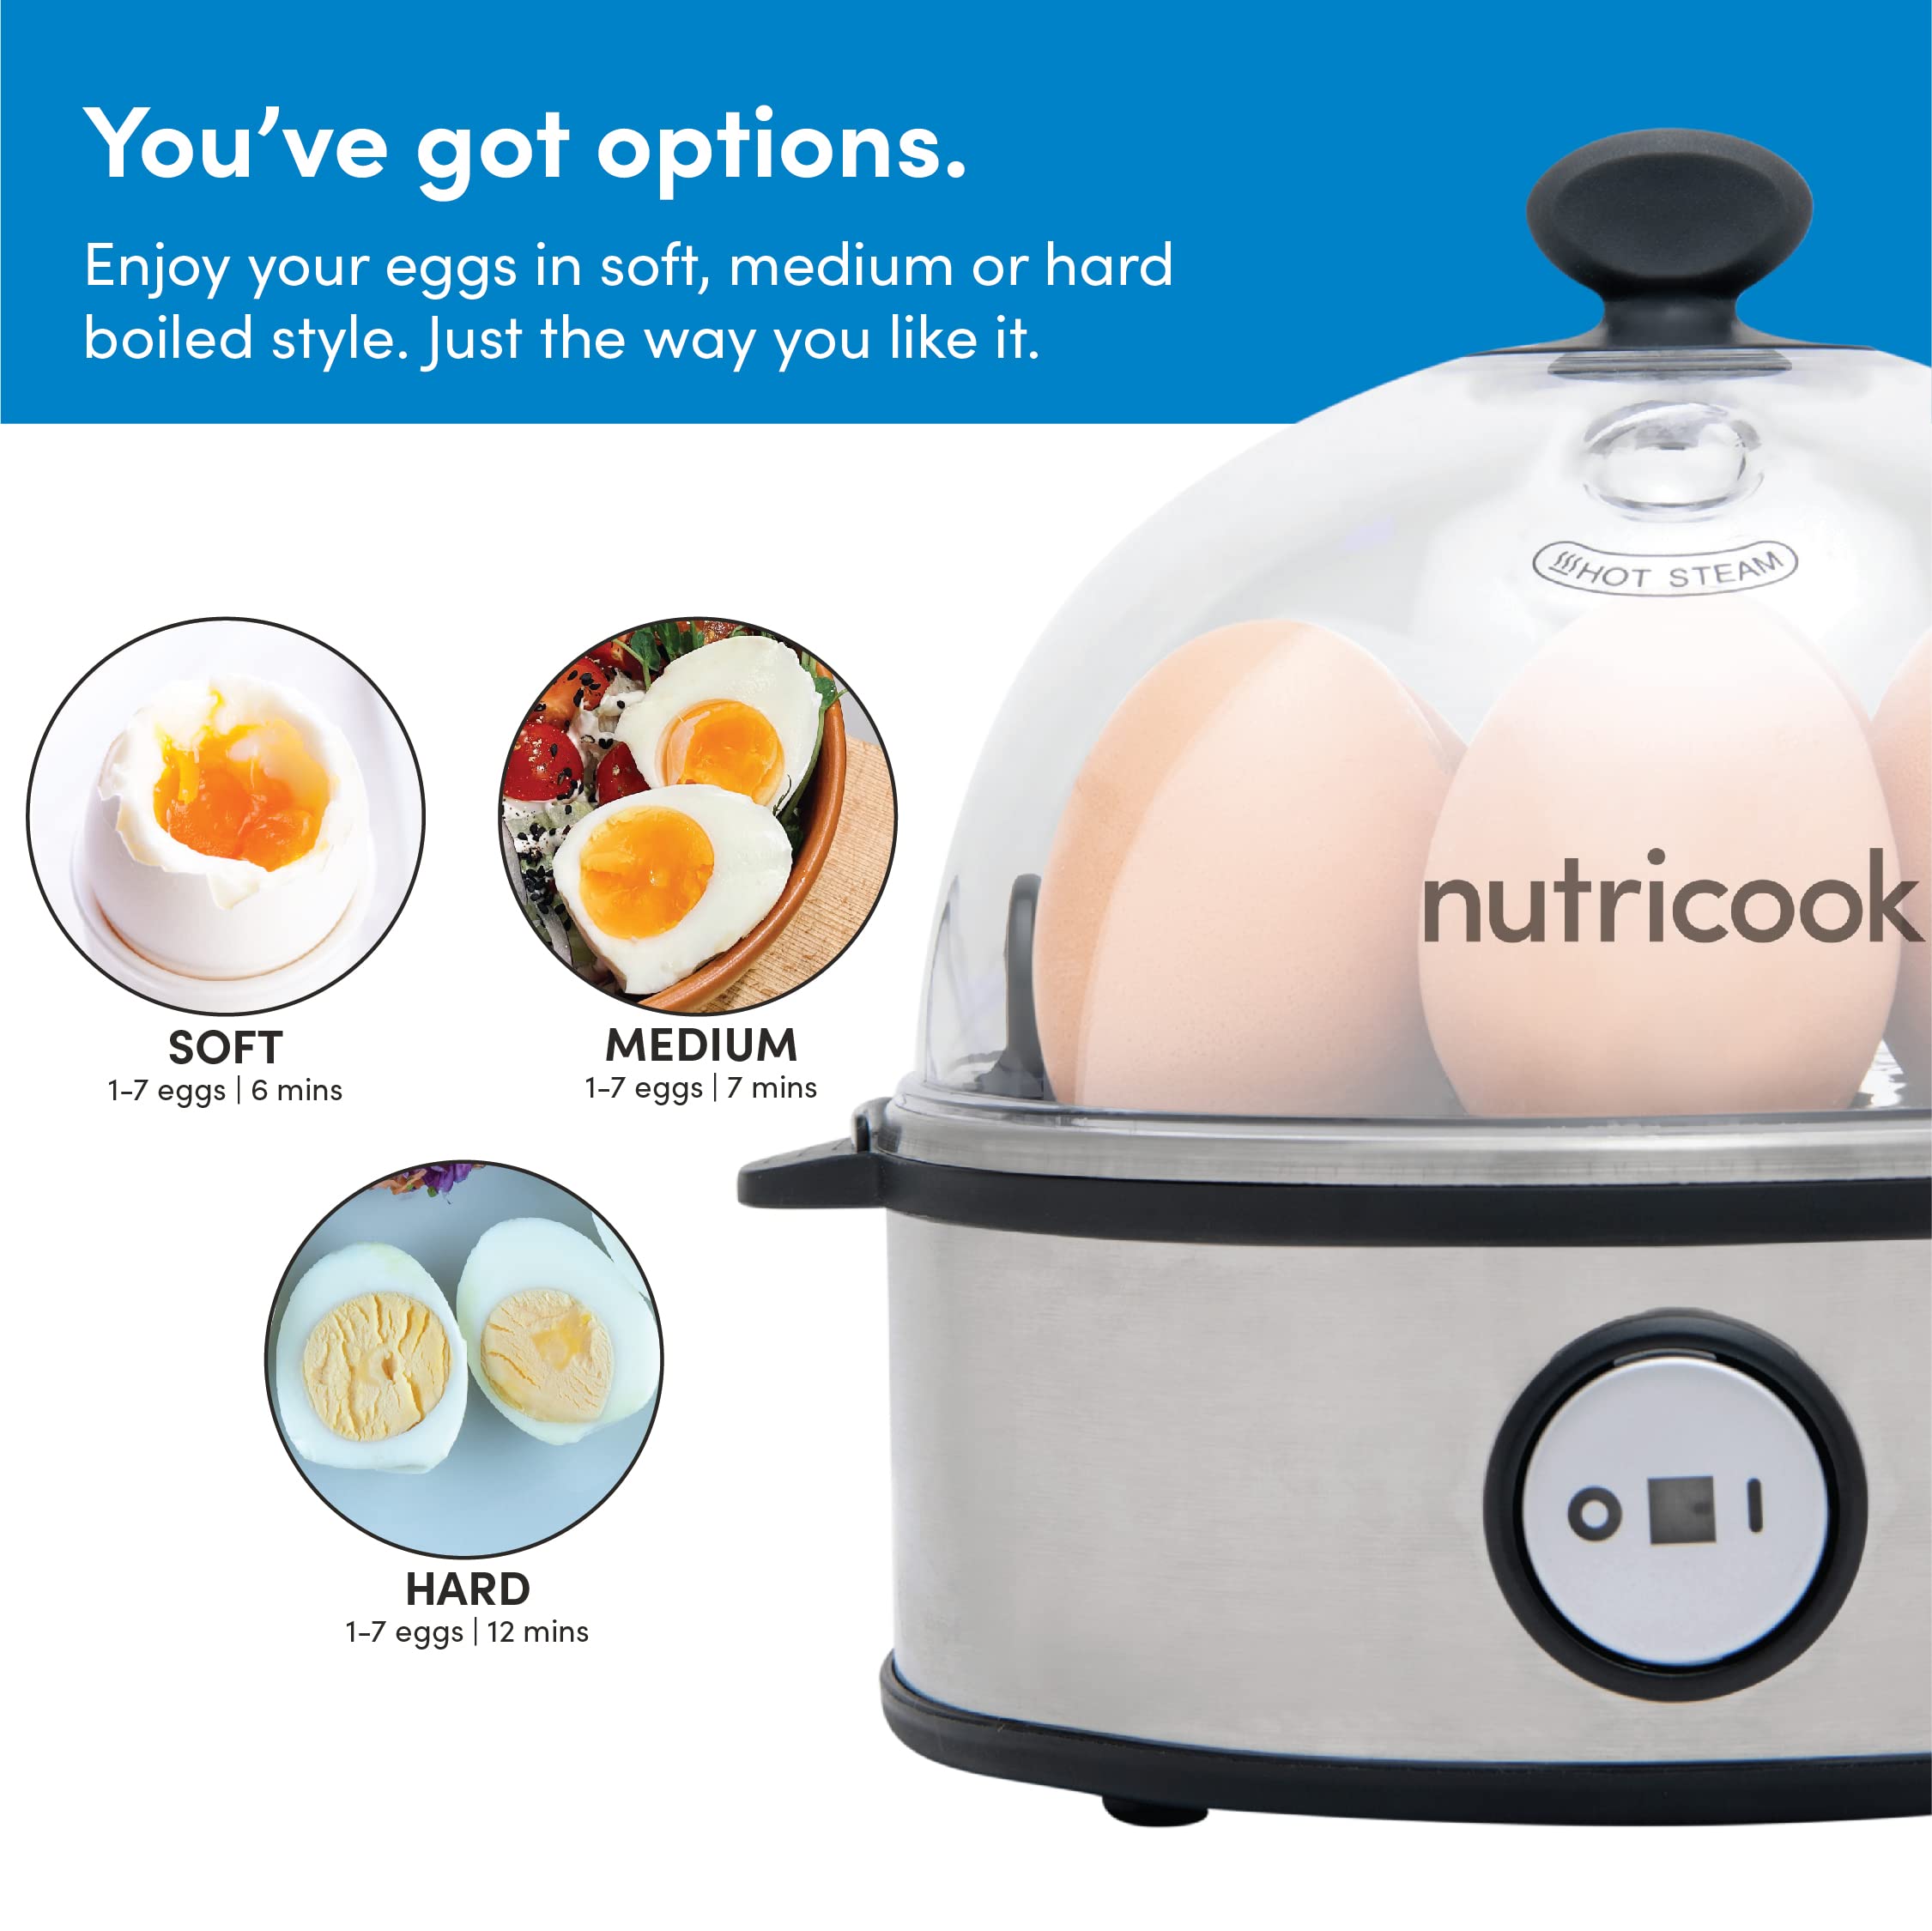 NutriCook Rapid Egg Cooker: 7 Egg Capacity Electric Egg Cooker for Boiled Eggs, Poached Eggs, Scrambled Eggs, or Omelettes with Auto Shut Off Feature - Silver